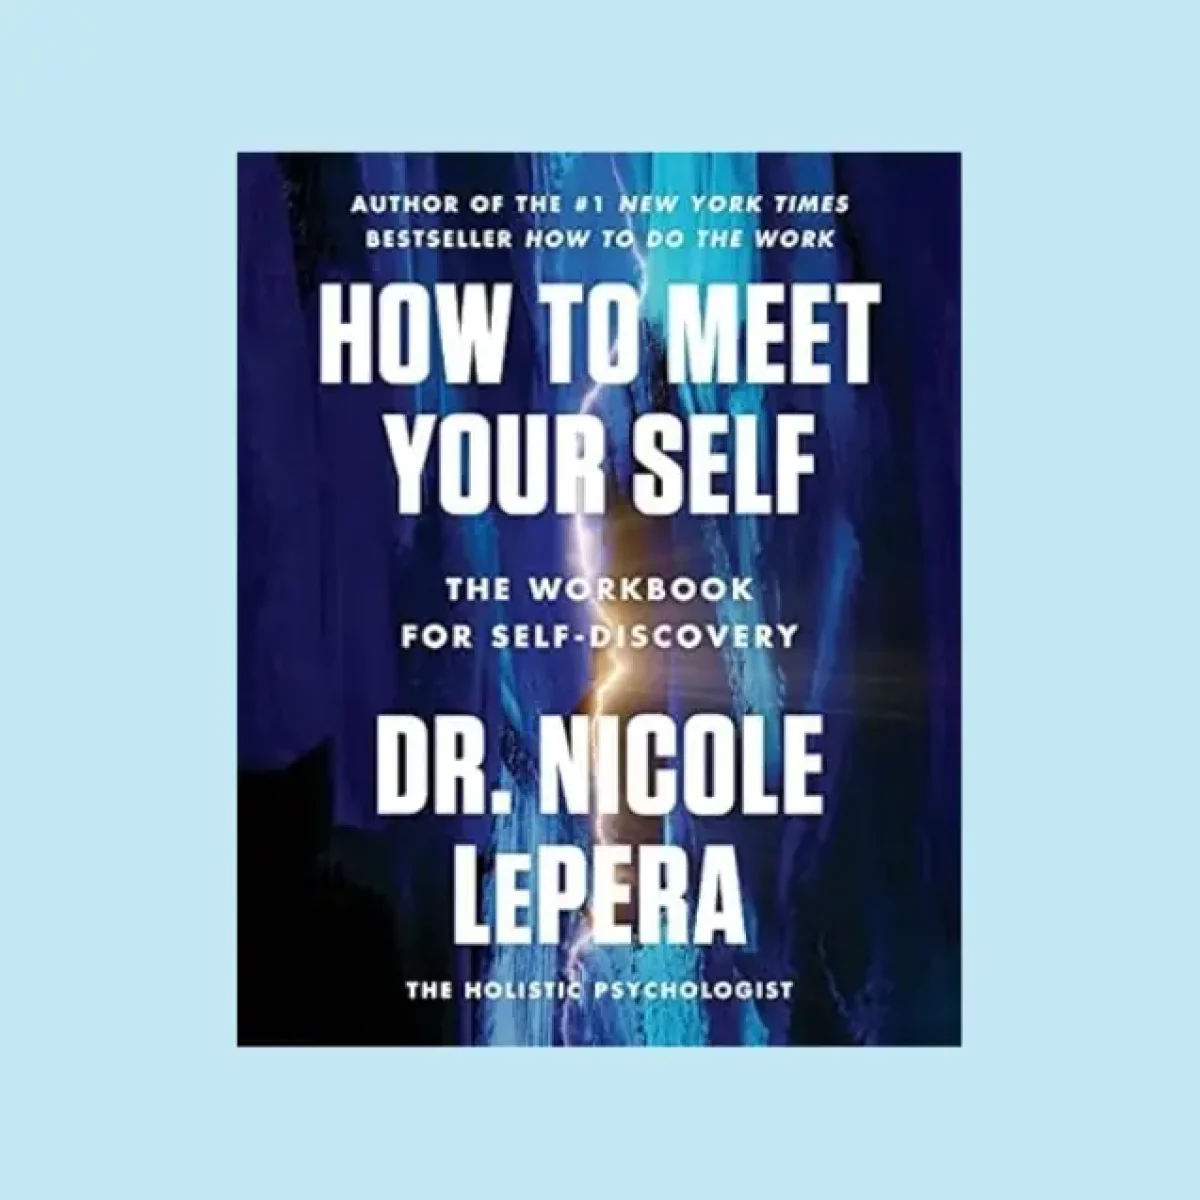 Cover of How to Meet Your Self by Dr. Nicole Lepera